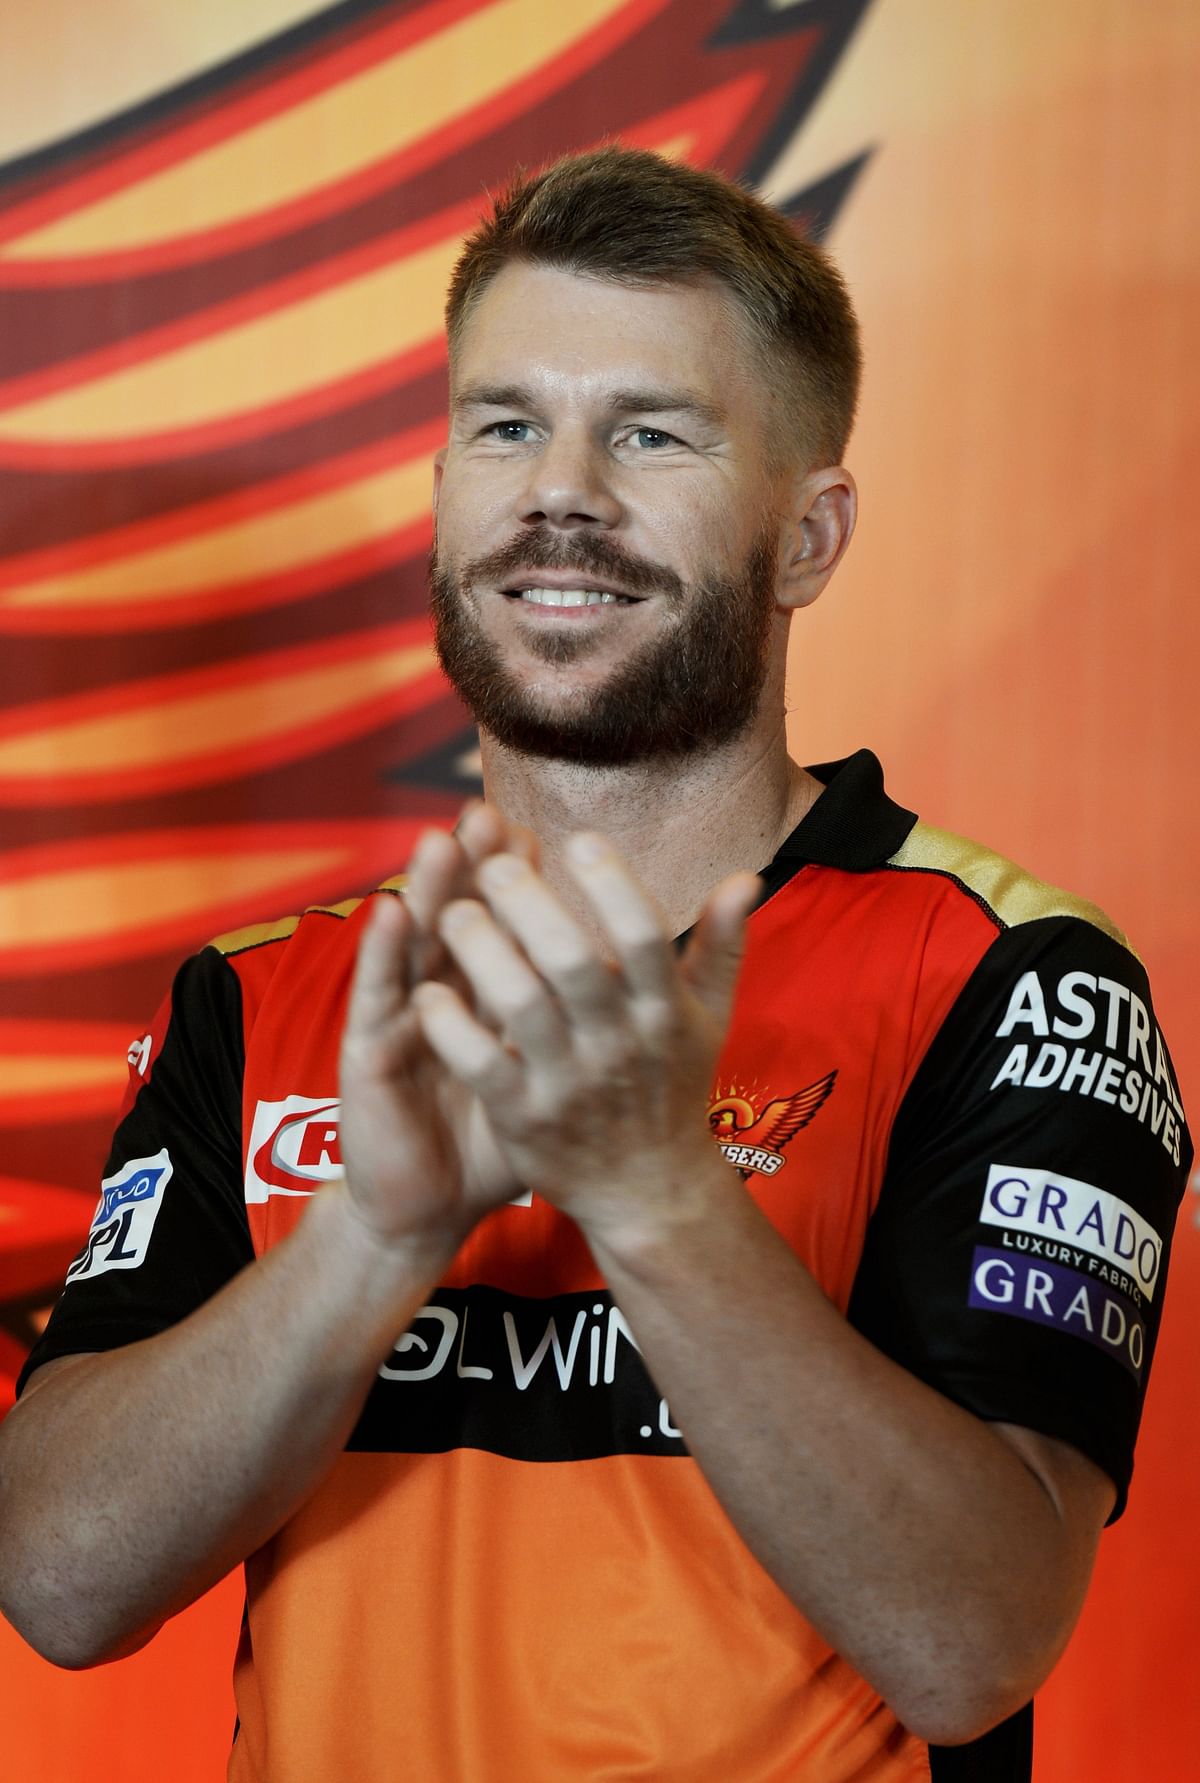 In this file photo taken on 20 March 2019, Sunrisers Hyderabad cricketer David Warner applauds during a press conference in Hyderabad ahead of the start of the 2019 Indian Premier League (IPL) cricket tournament. Photo: AFP